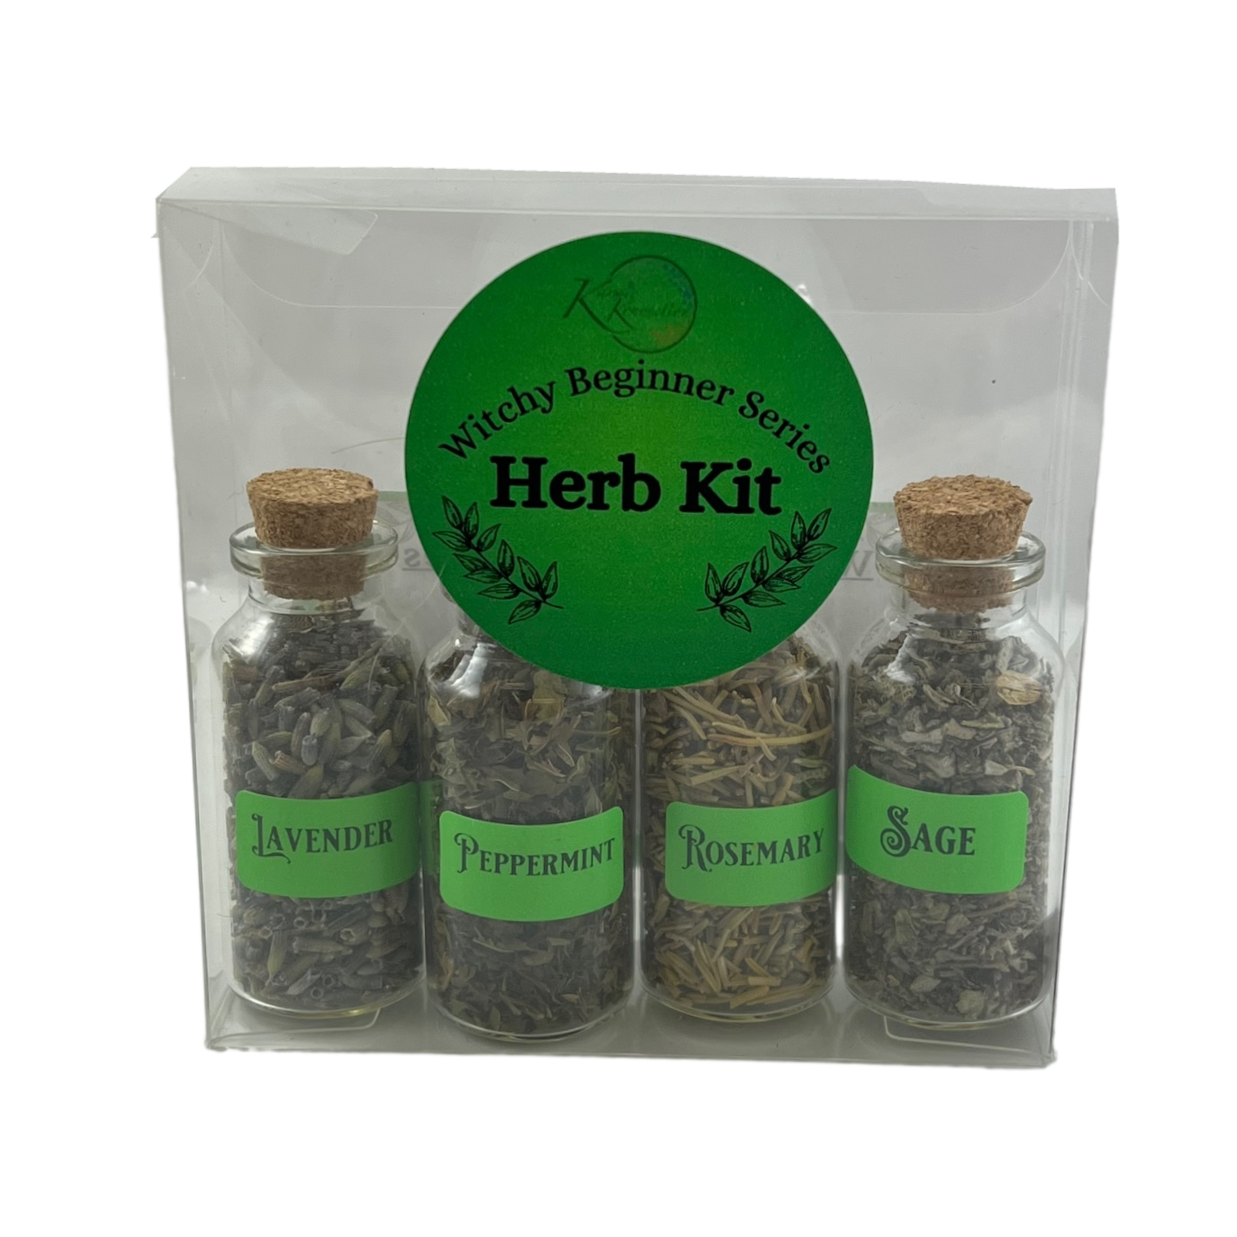 Witchy Beginner series herb kit with lavender, peppermint, rosemary, sage